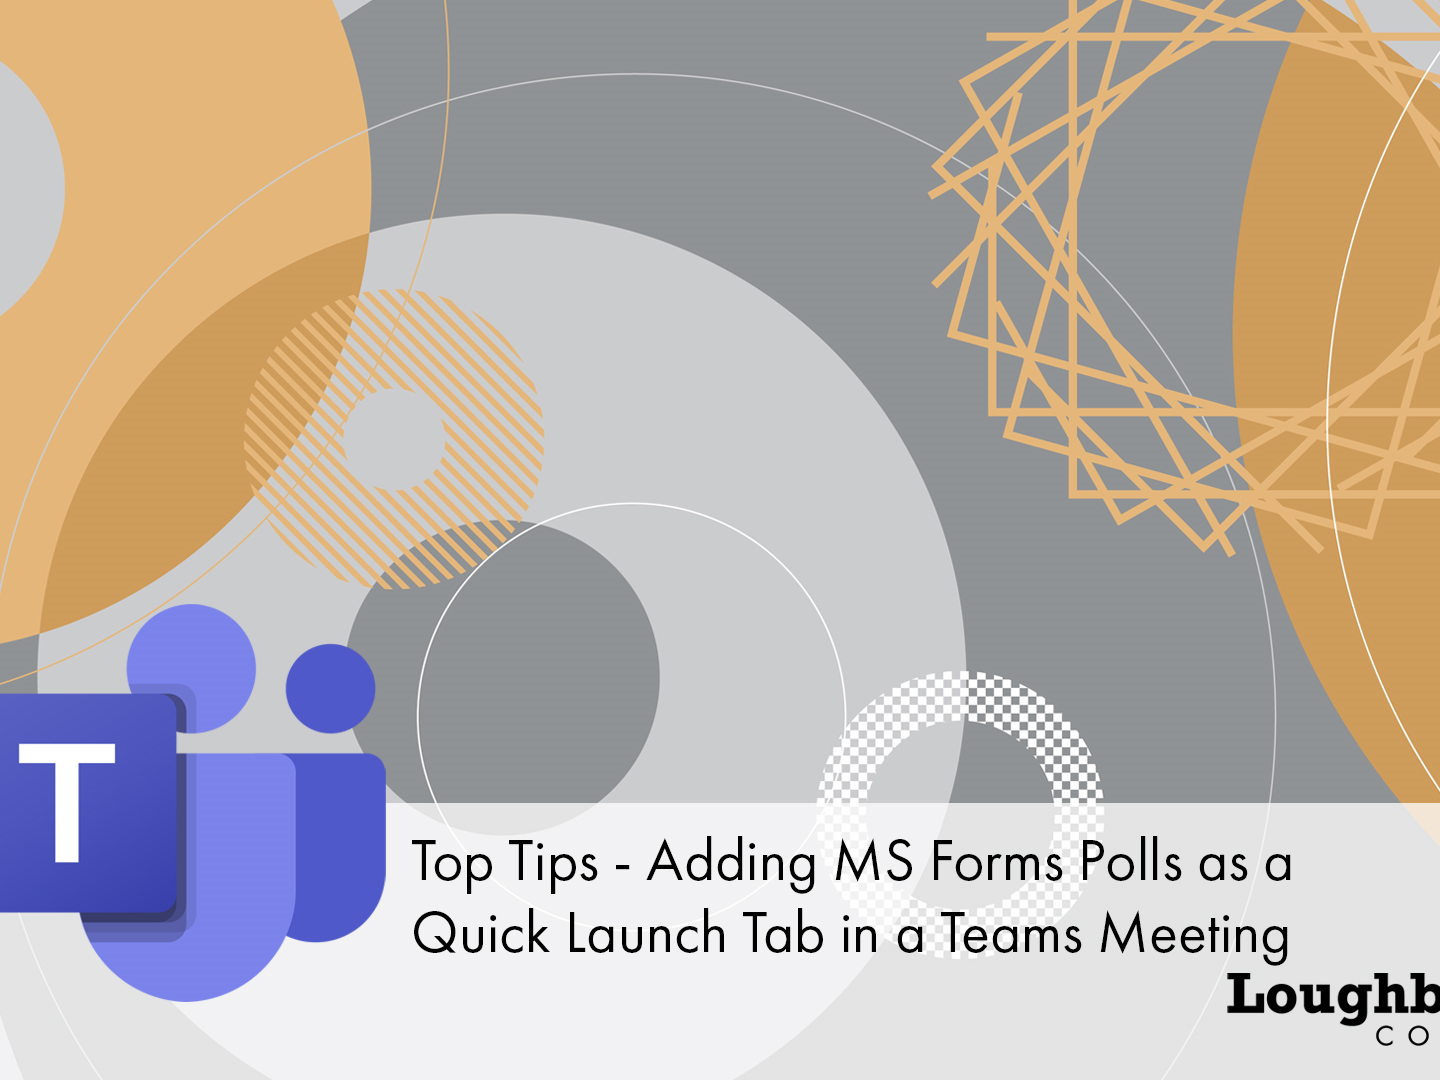 Top Tips – Adding MS Forms Polls as a Quick Launch Tab in a Teams Meeting